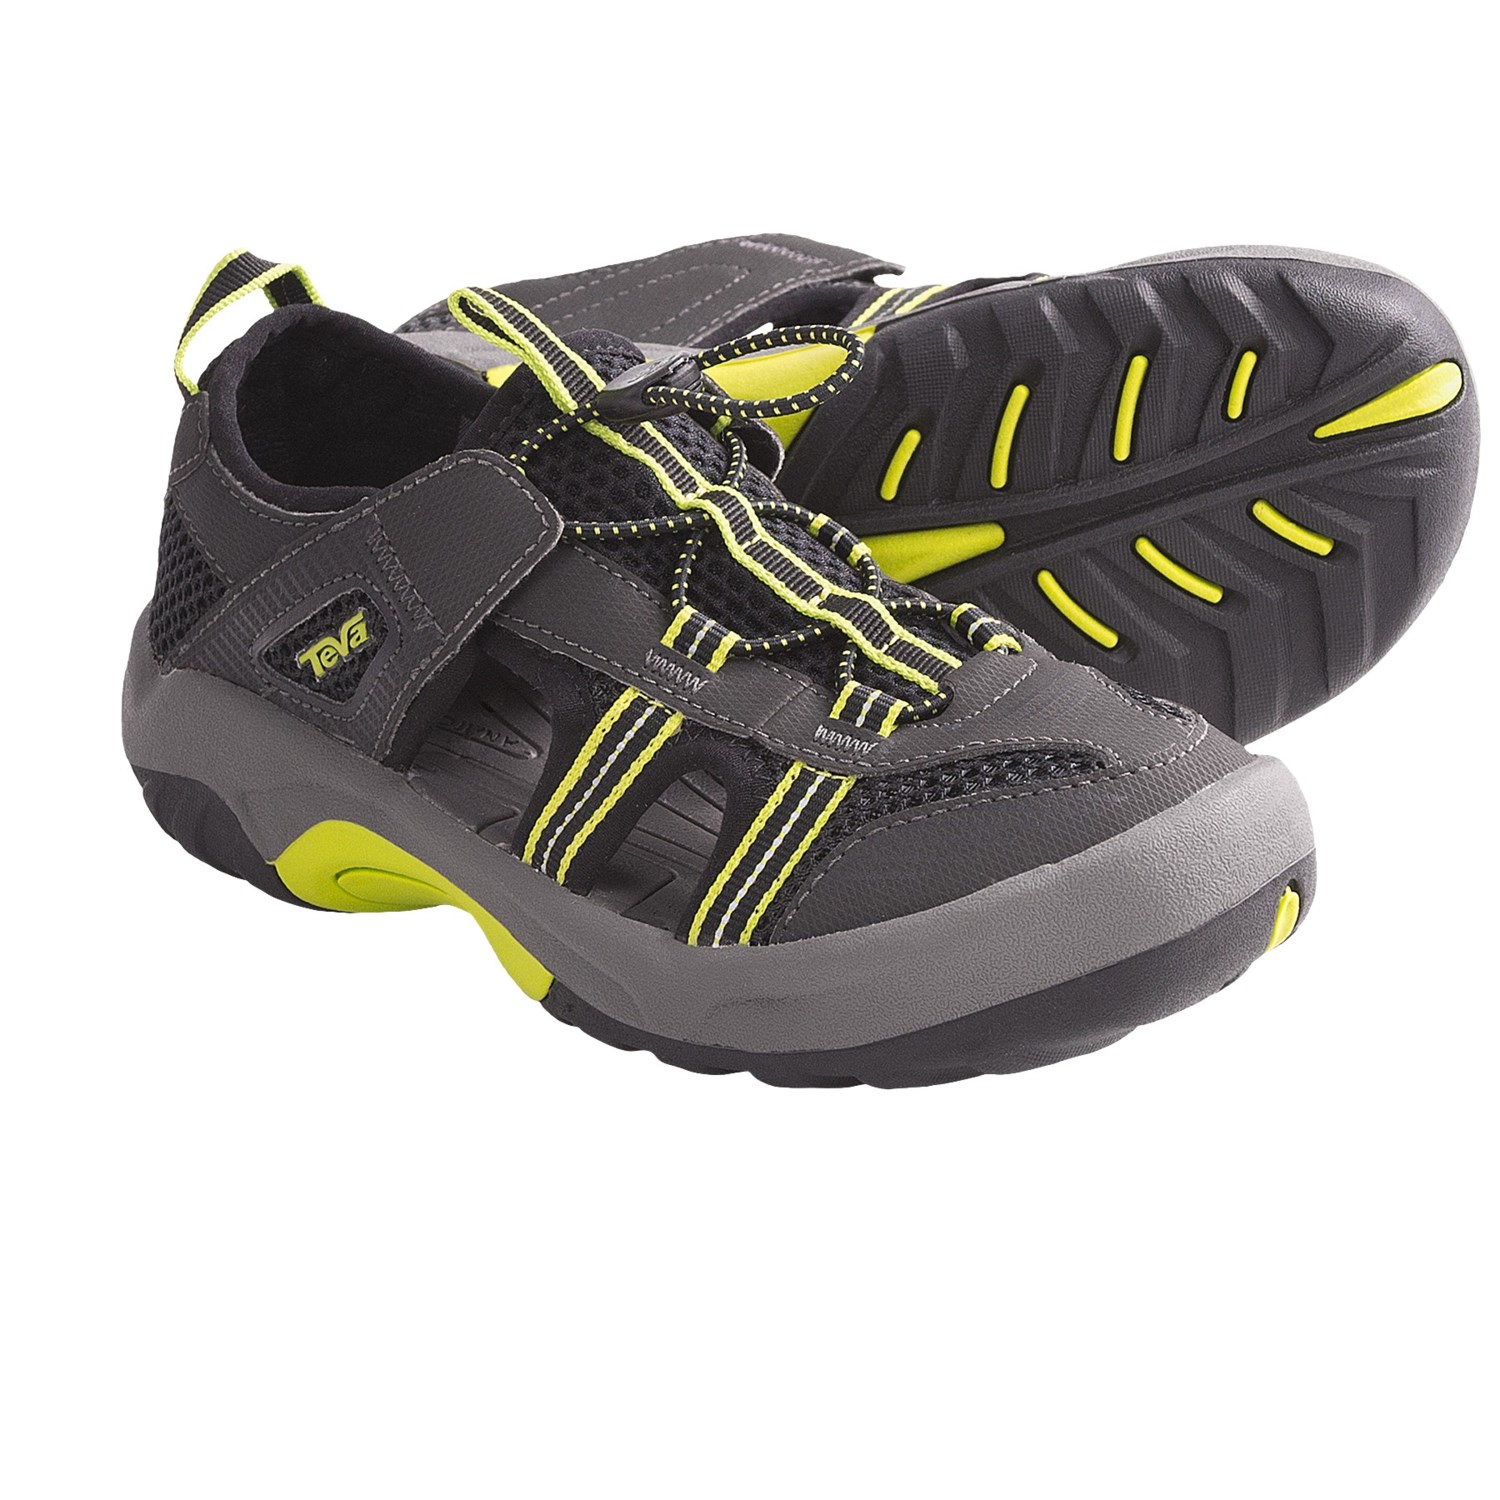 Teva Omnium 2 Shoes (For Kids and Youth) - Save 36%